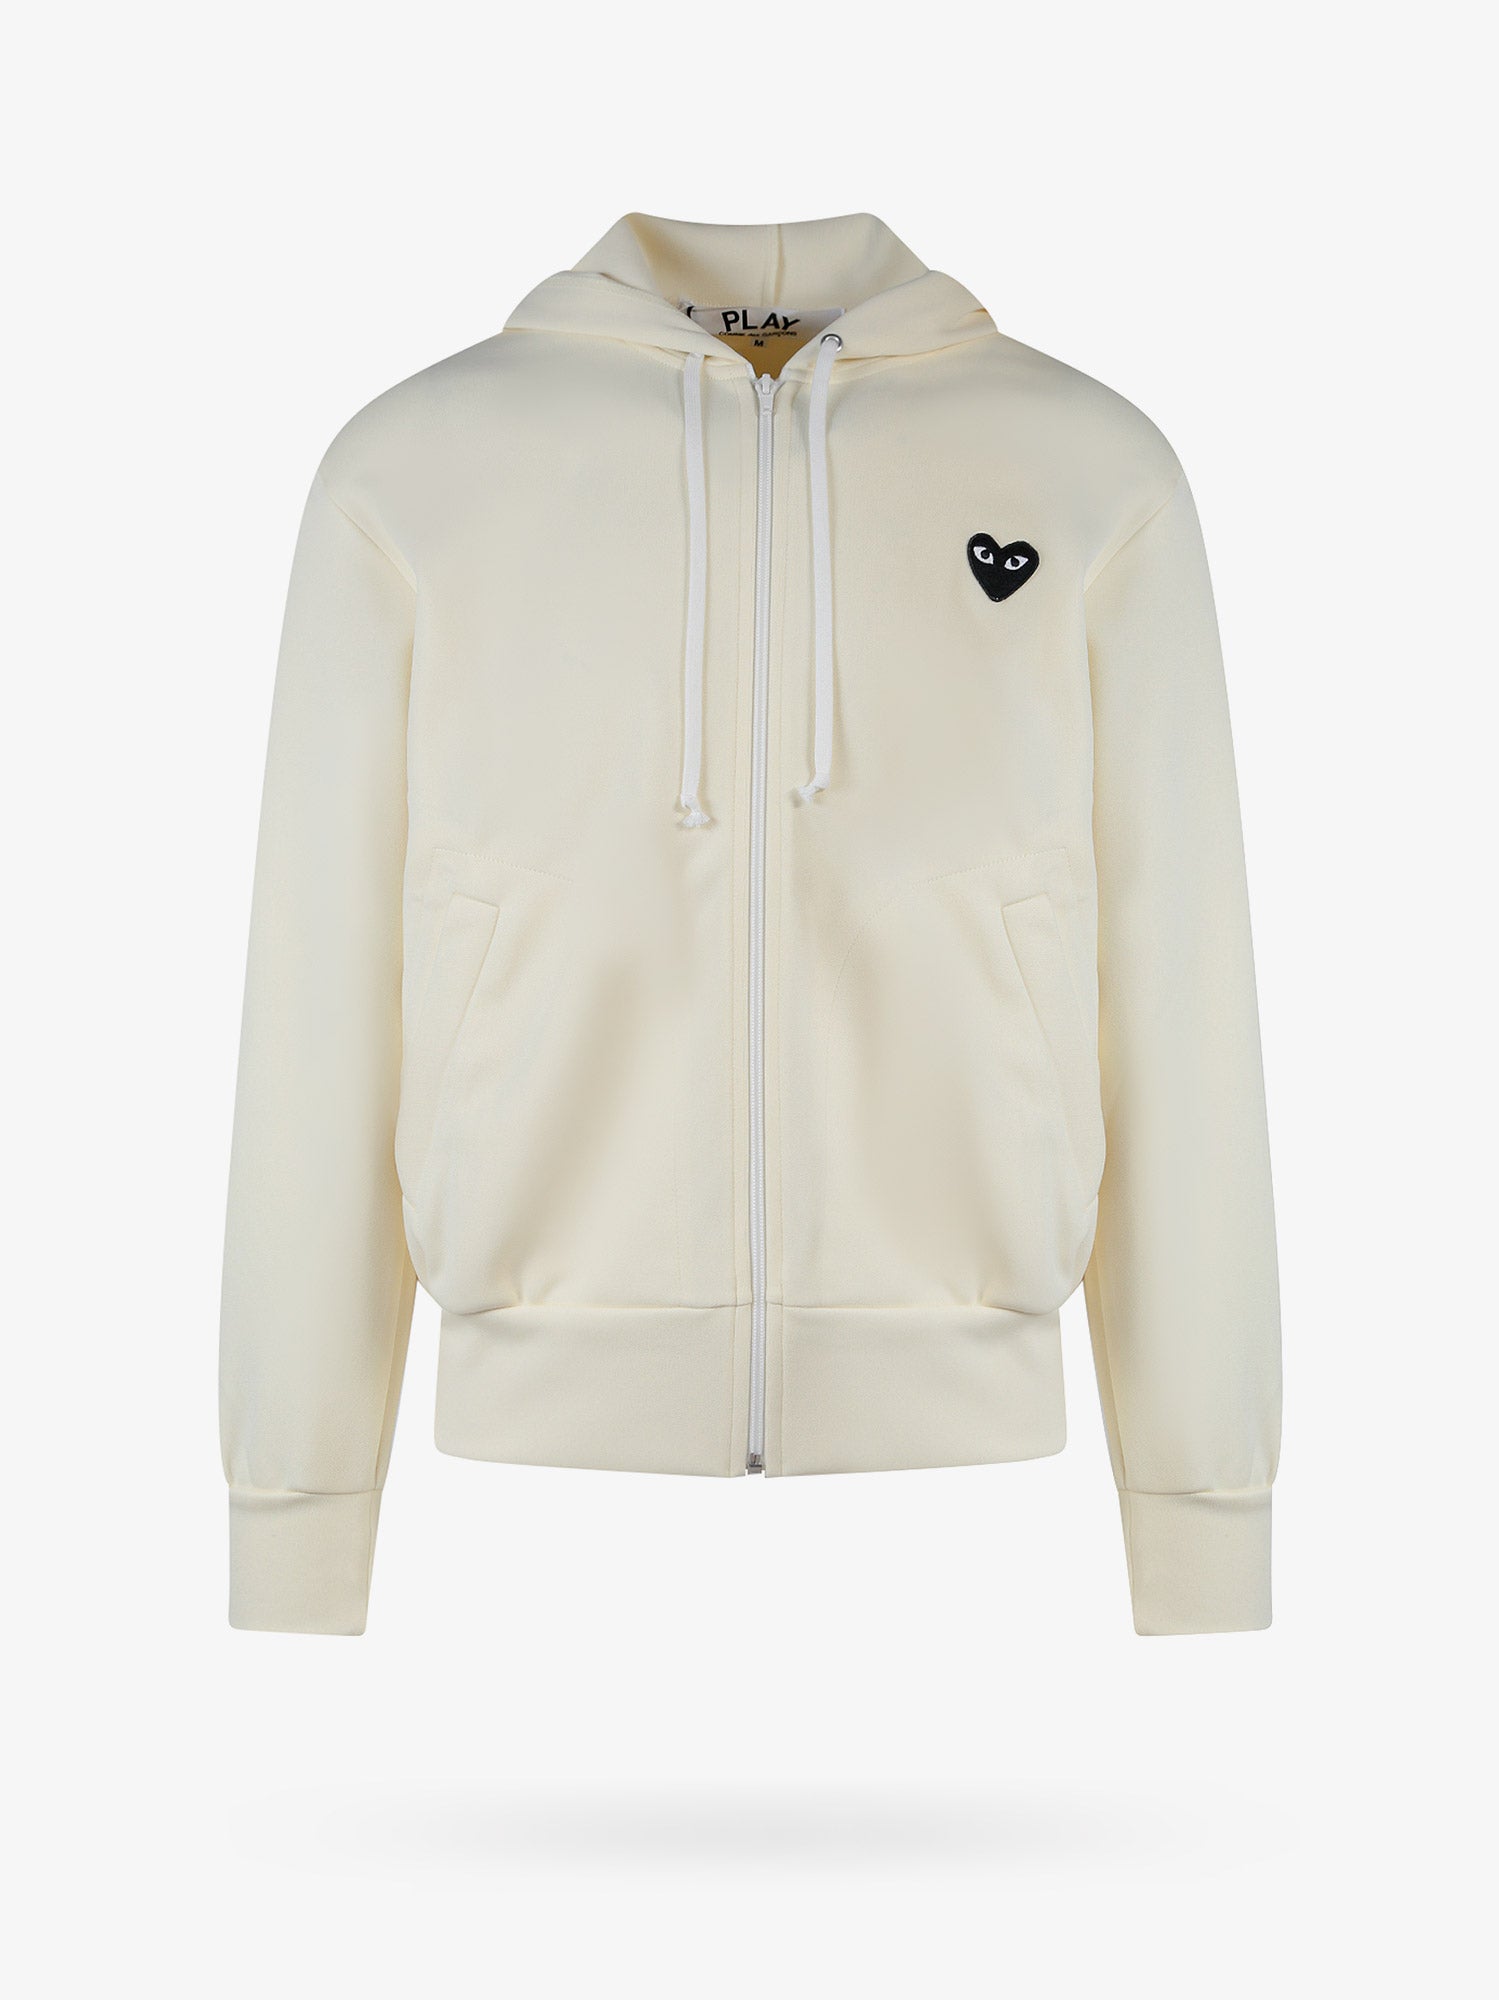 Comme Des Garçons Play Comme Des Garcons Play Men Hooded Zip Up Sweatshirt With Black Small Heart In Ivory